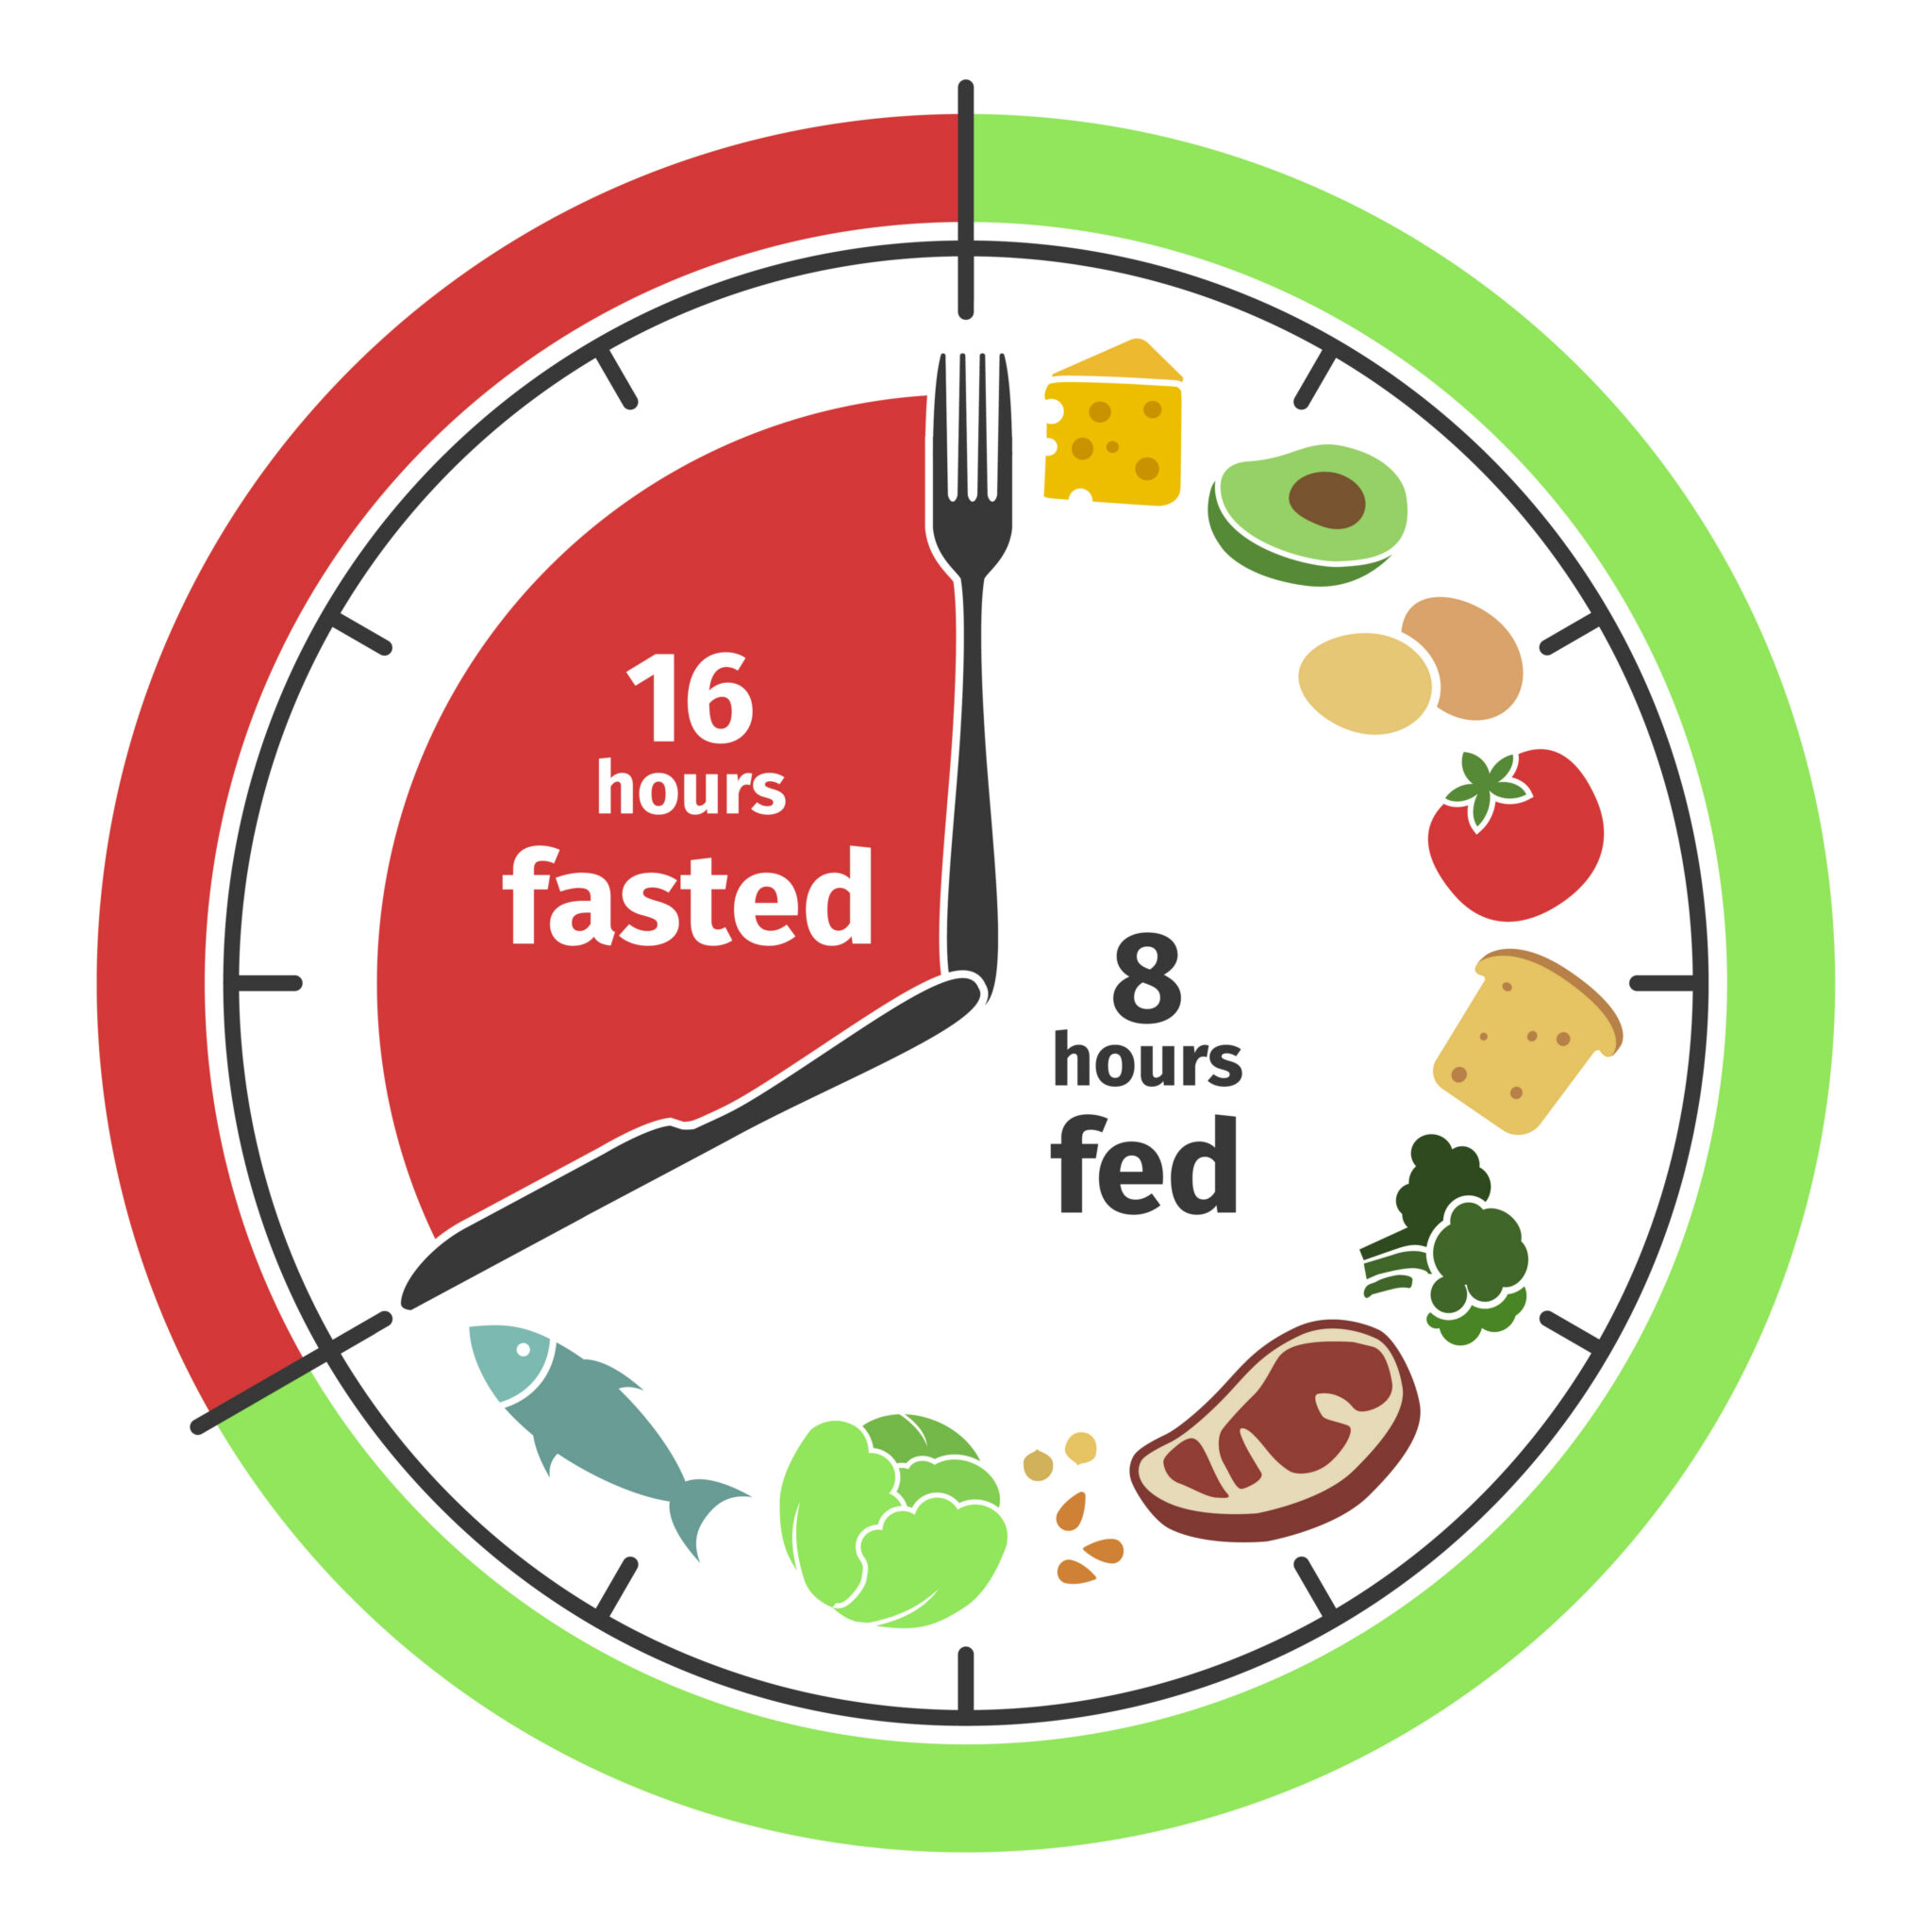 new research on intermittent fasting